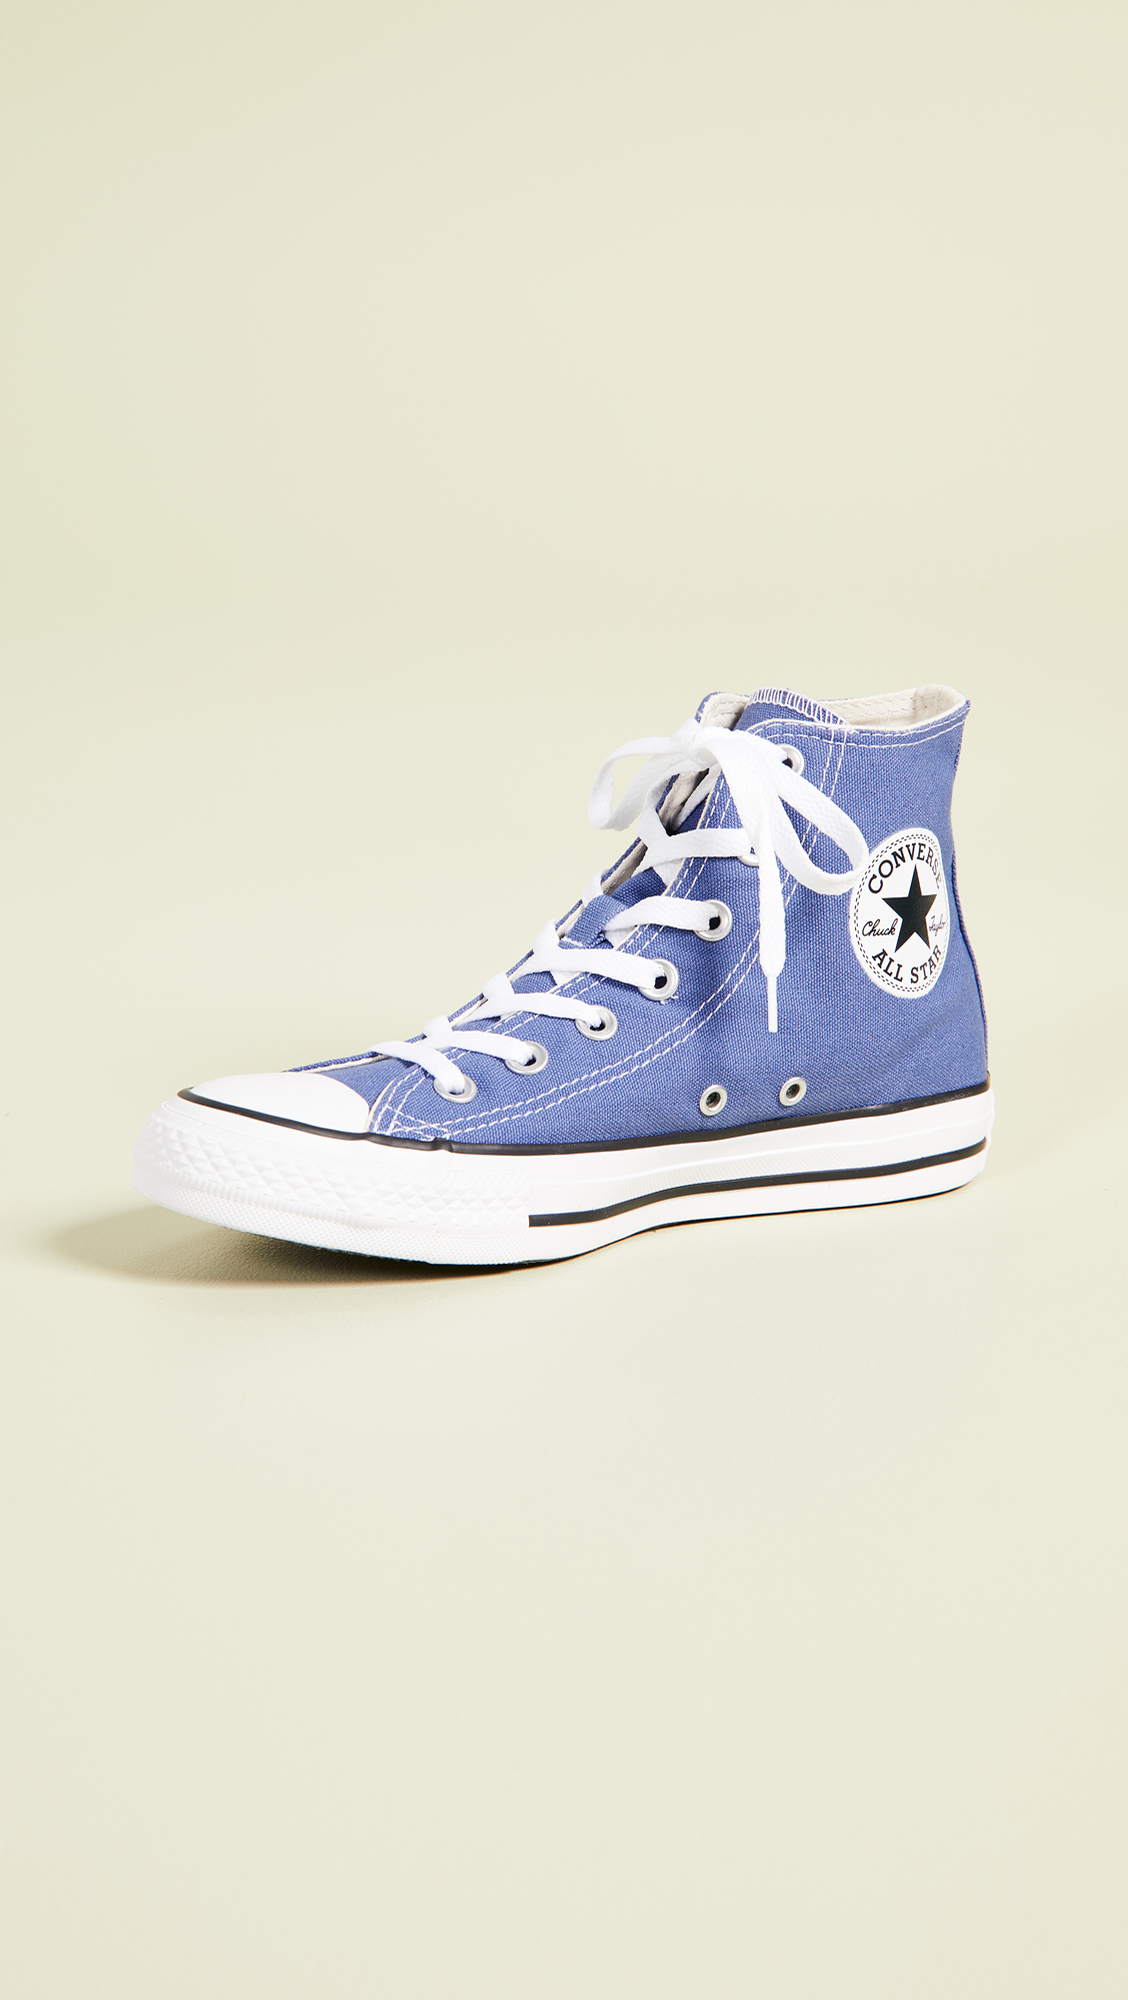 Chuck Taylor All Star High Top Sneakers